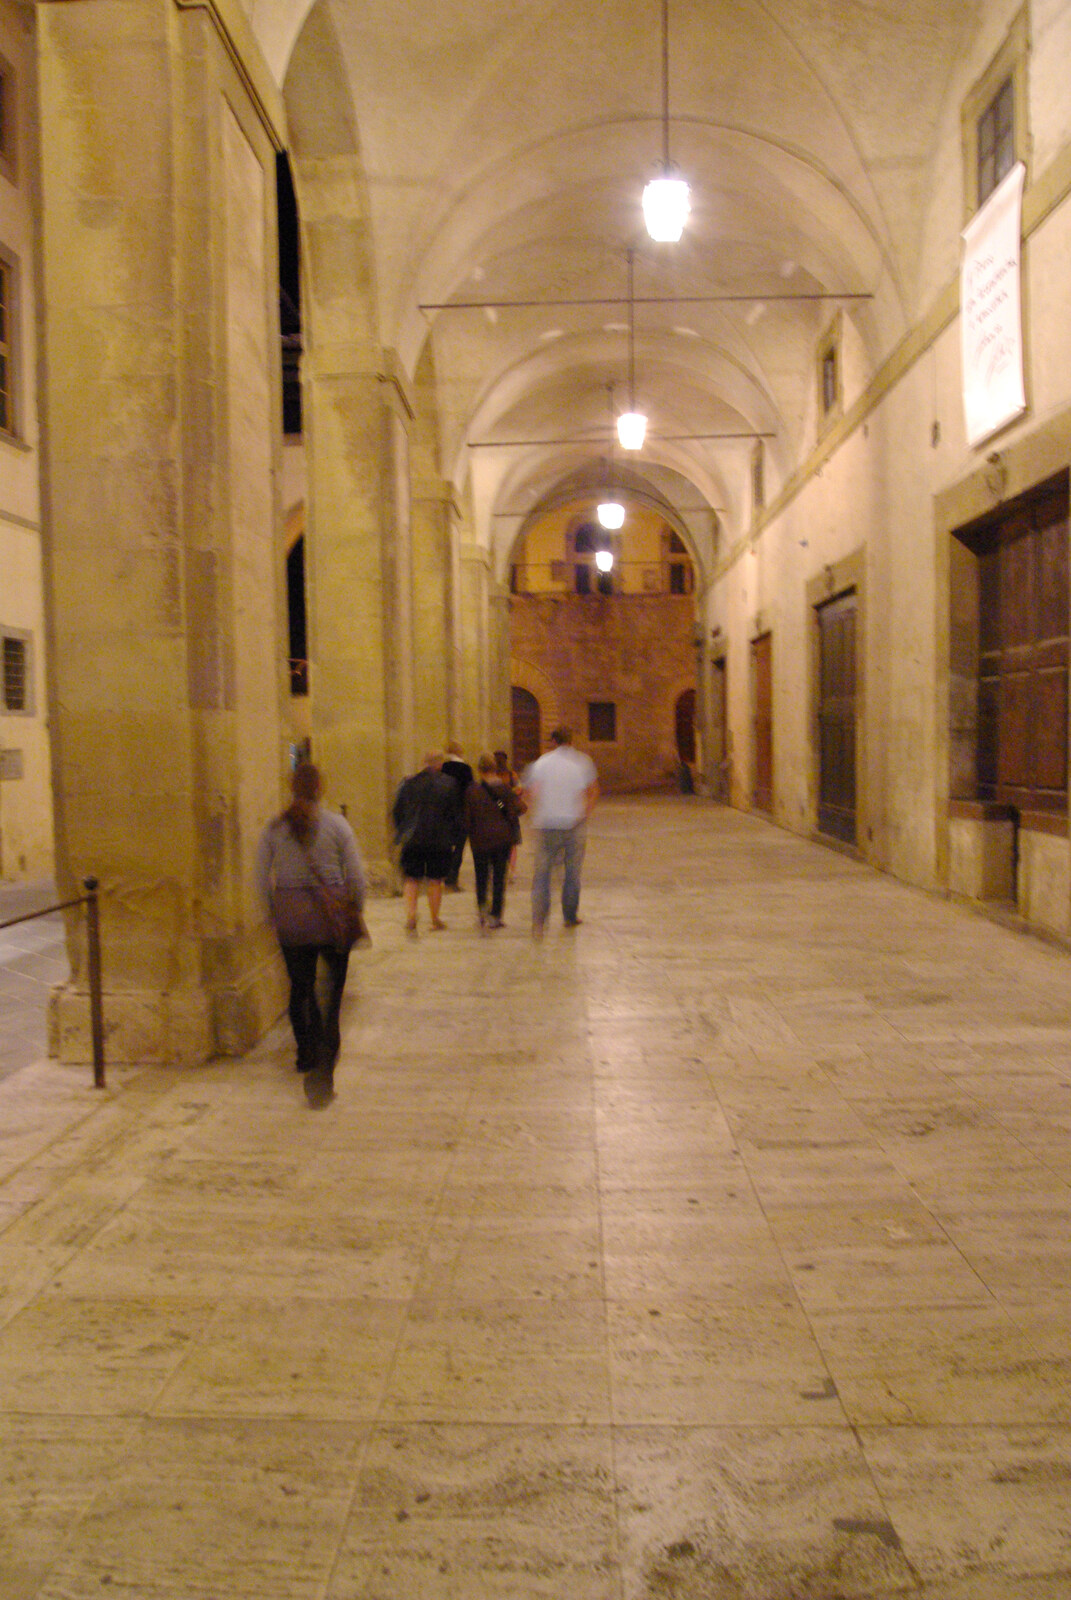 Wandering off among the columns from Tenuta Il Palazzo in Arezzo, Tuscany, Italy - 22nd July 2008